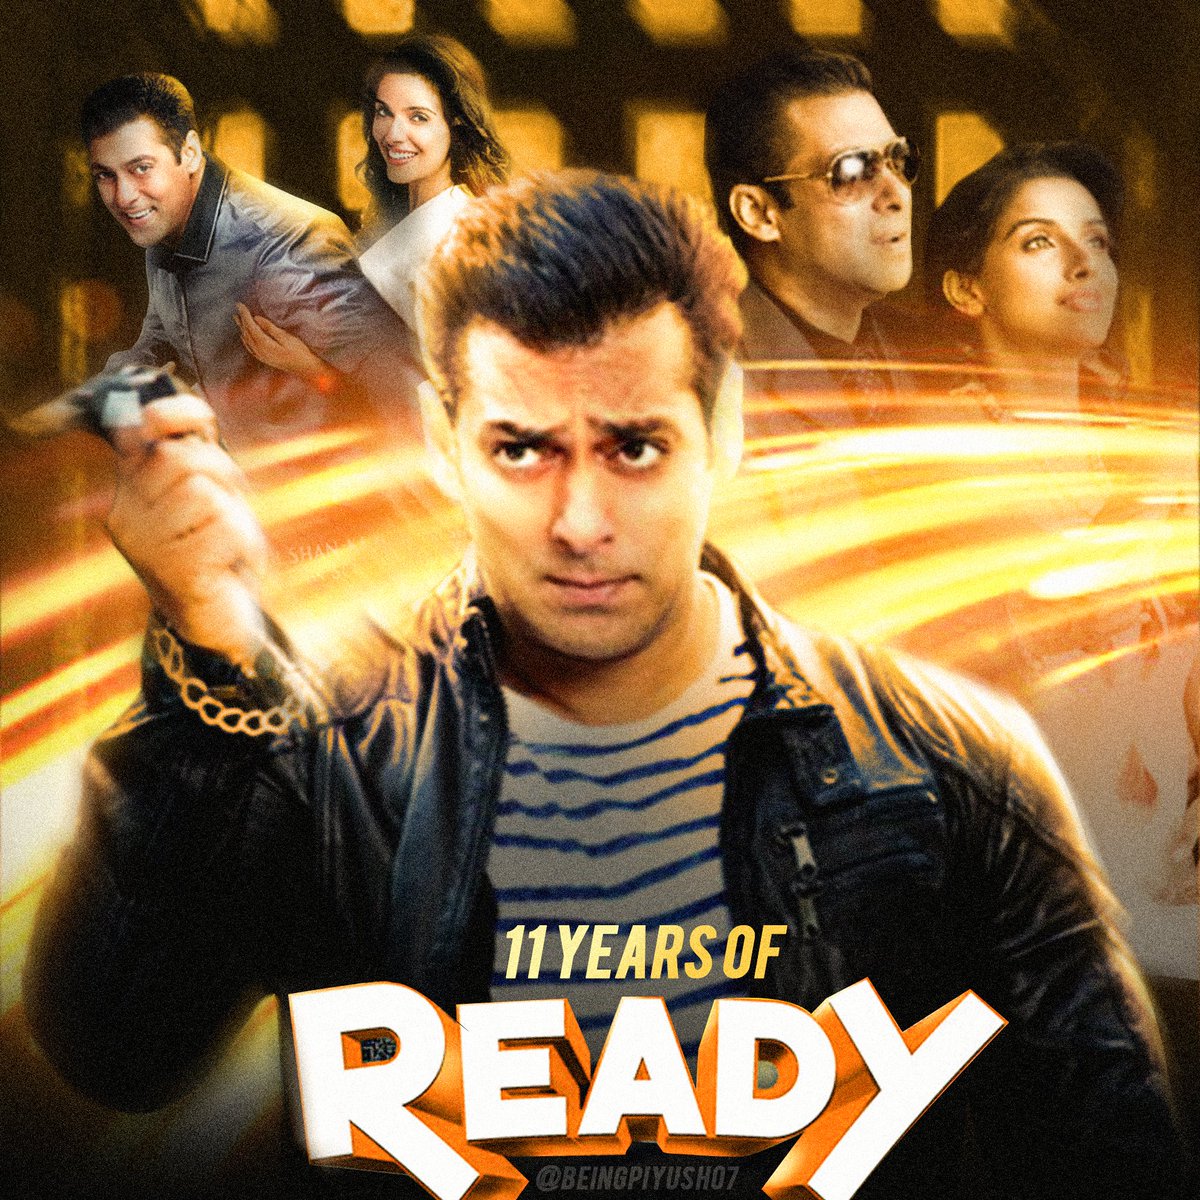 This movie was hilarious and entertaining. #SalmanKhan-Asin pair, Paresh Rawal, and the rest of the cast were so good. #11YearsOfREADY
first Non-Holiday 100 Crore Grosser and 2010s Decade's First Non-Holiday Blockbuster, Chartbuster Music Album!

11YRS OF BLOCKBUSTER READY